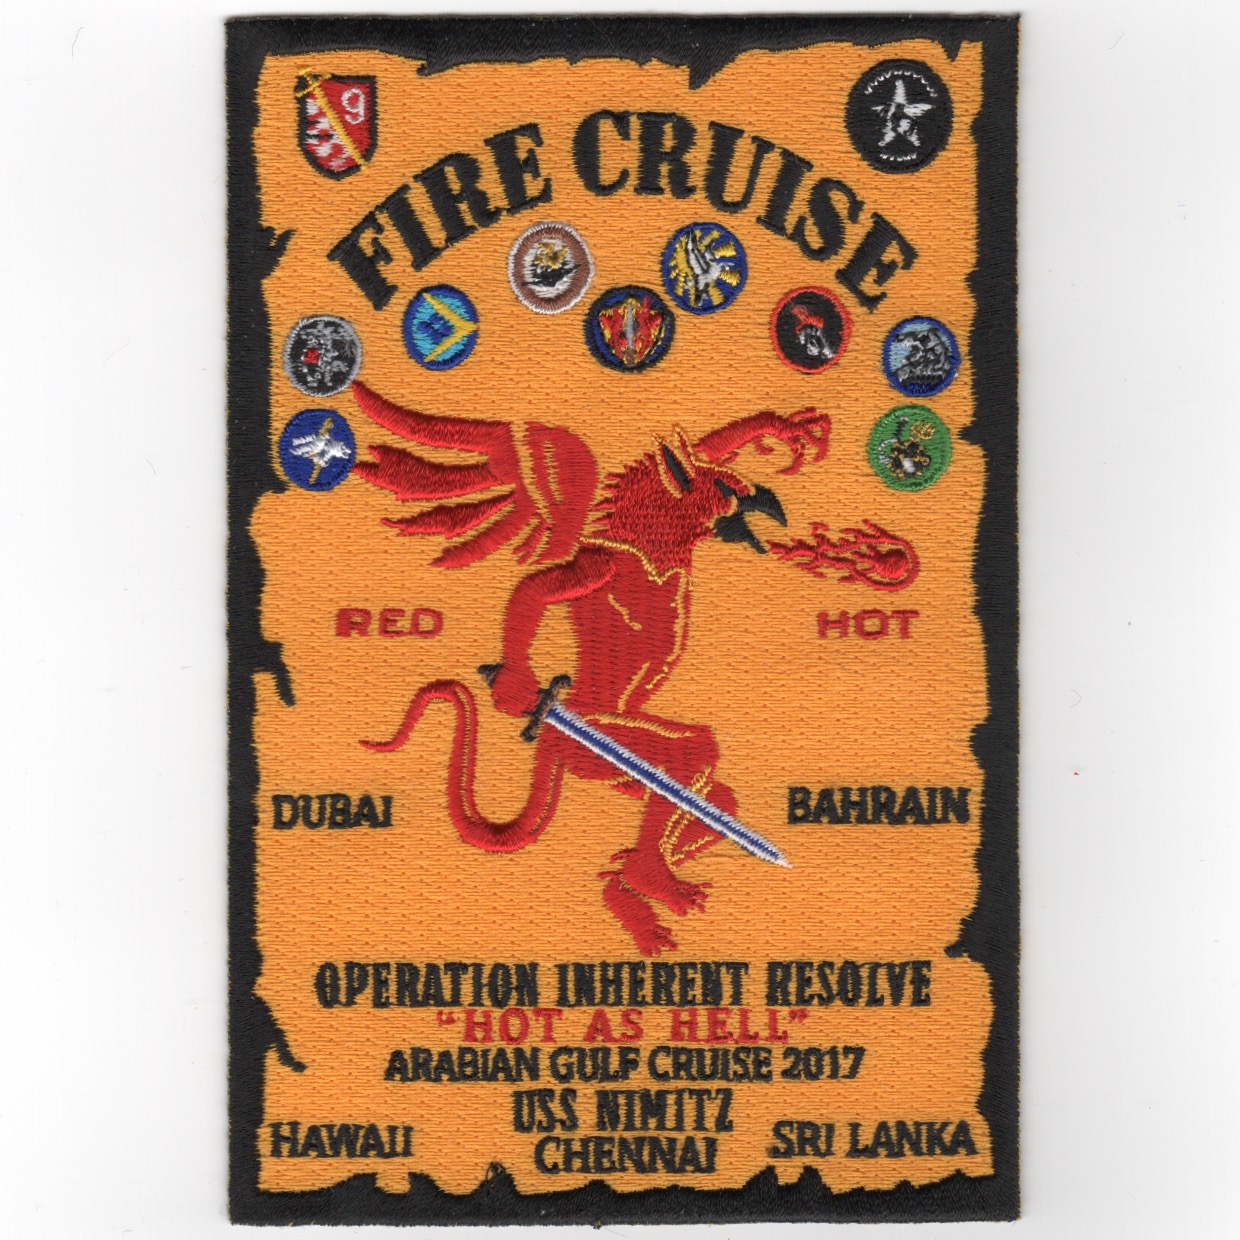 VFA-146/CVN-68 'FIRE CRUISE' Patch (Yellow)